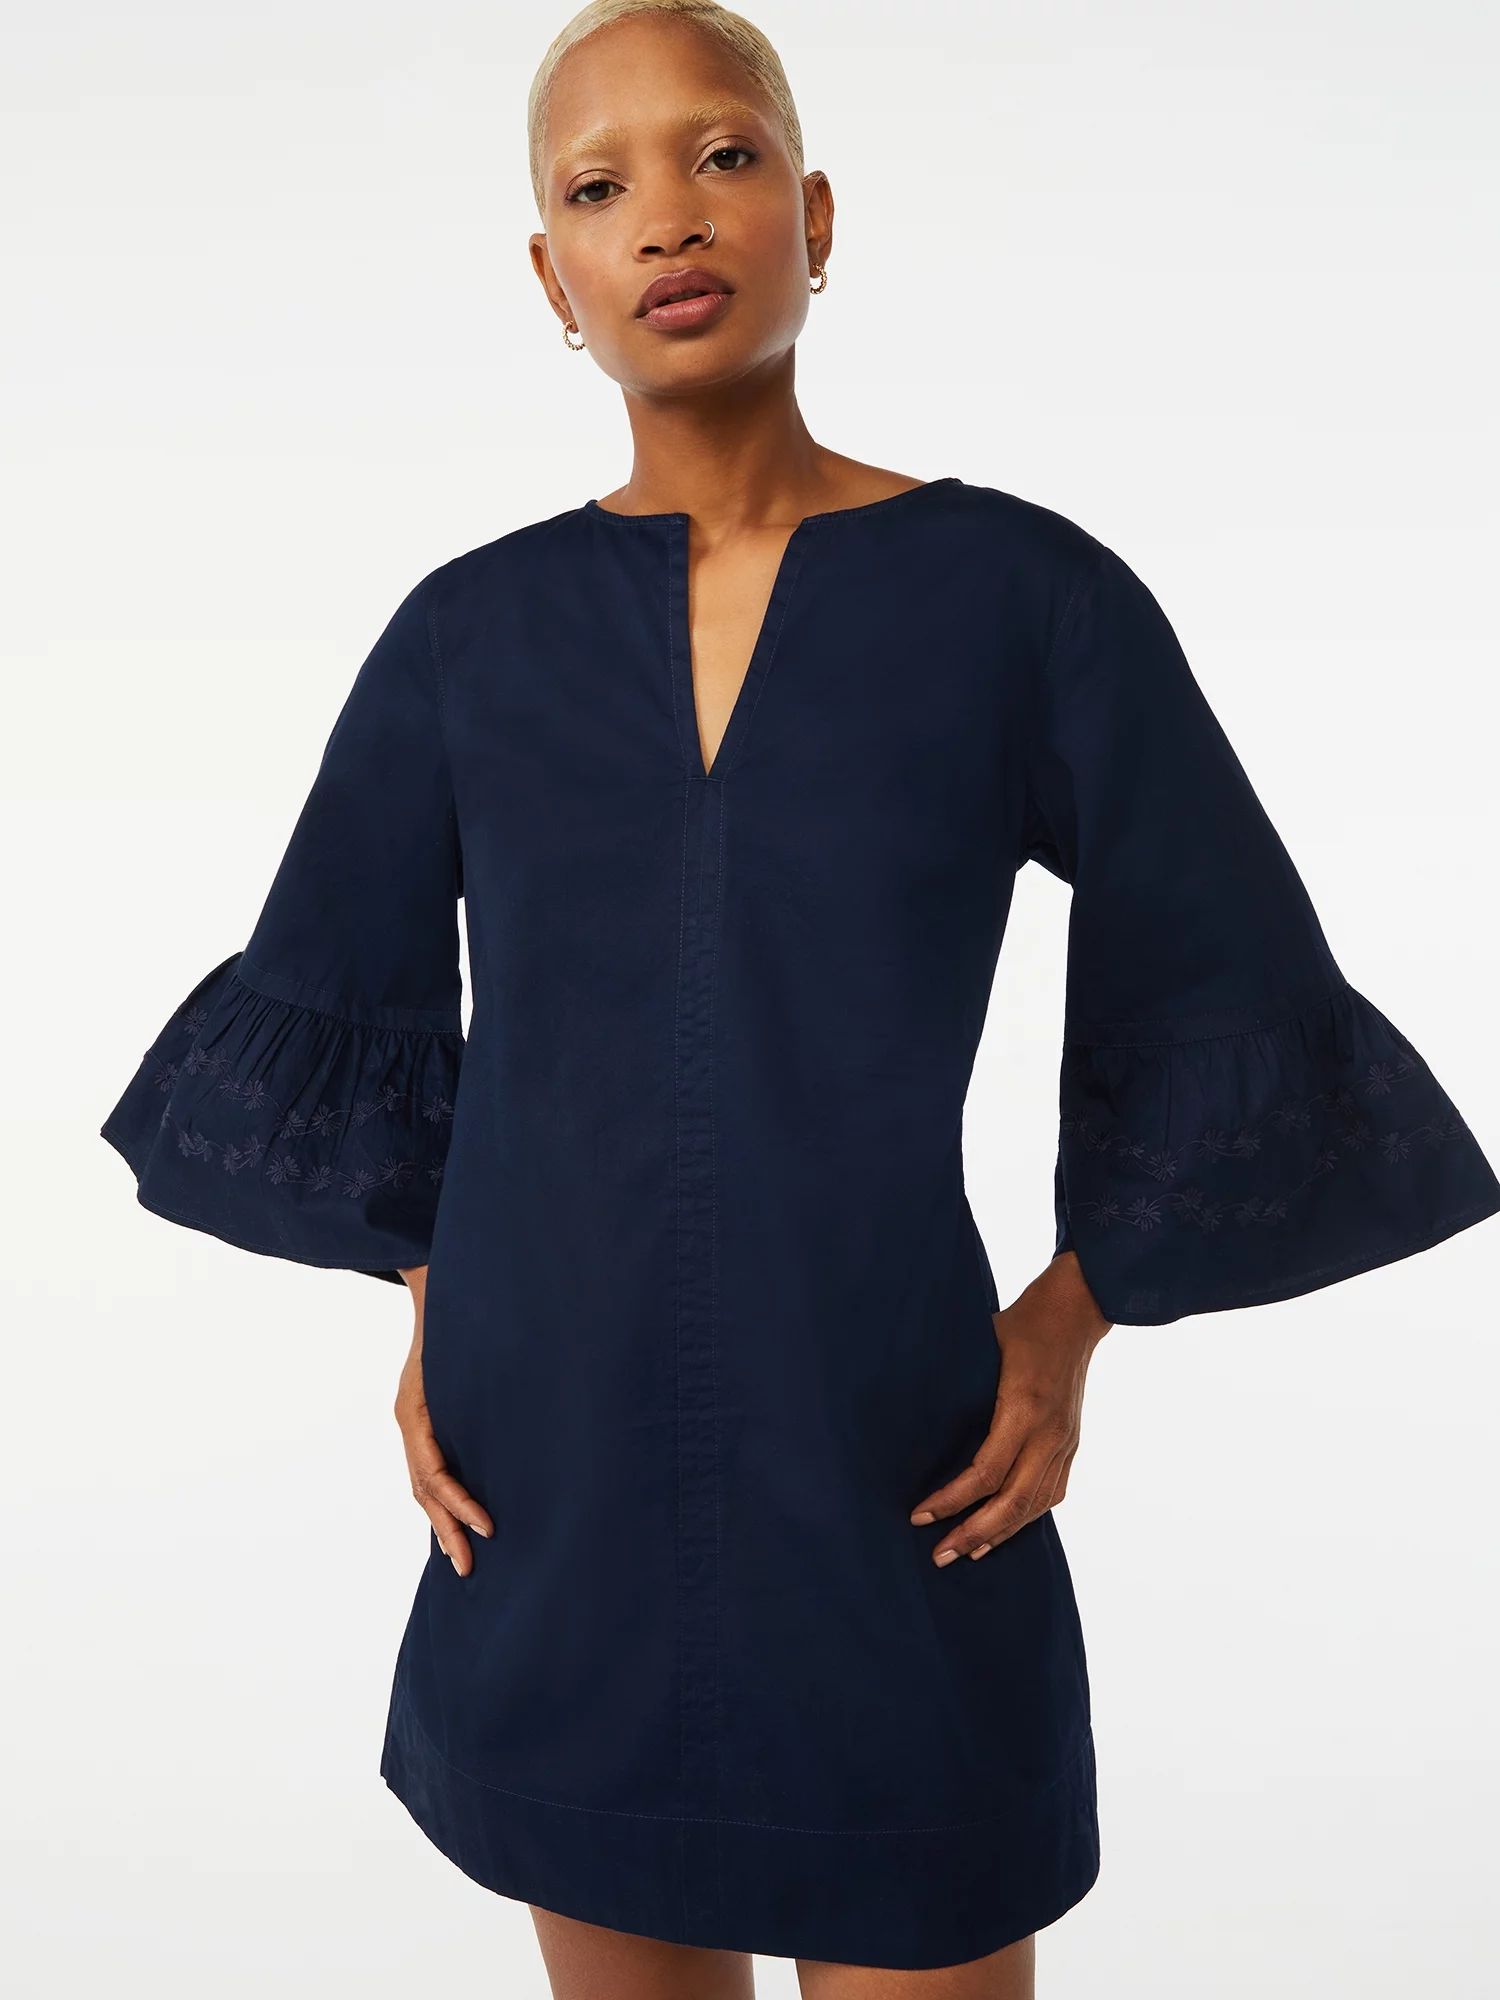 Free Assembly Women's Shift Dress with ¾ Bell Sleeves | Walmart (US)